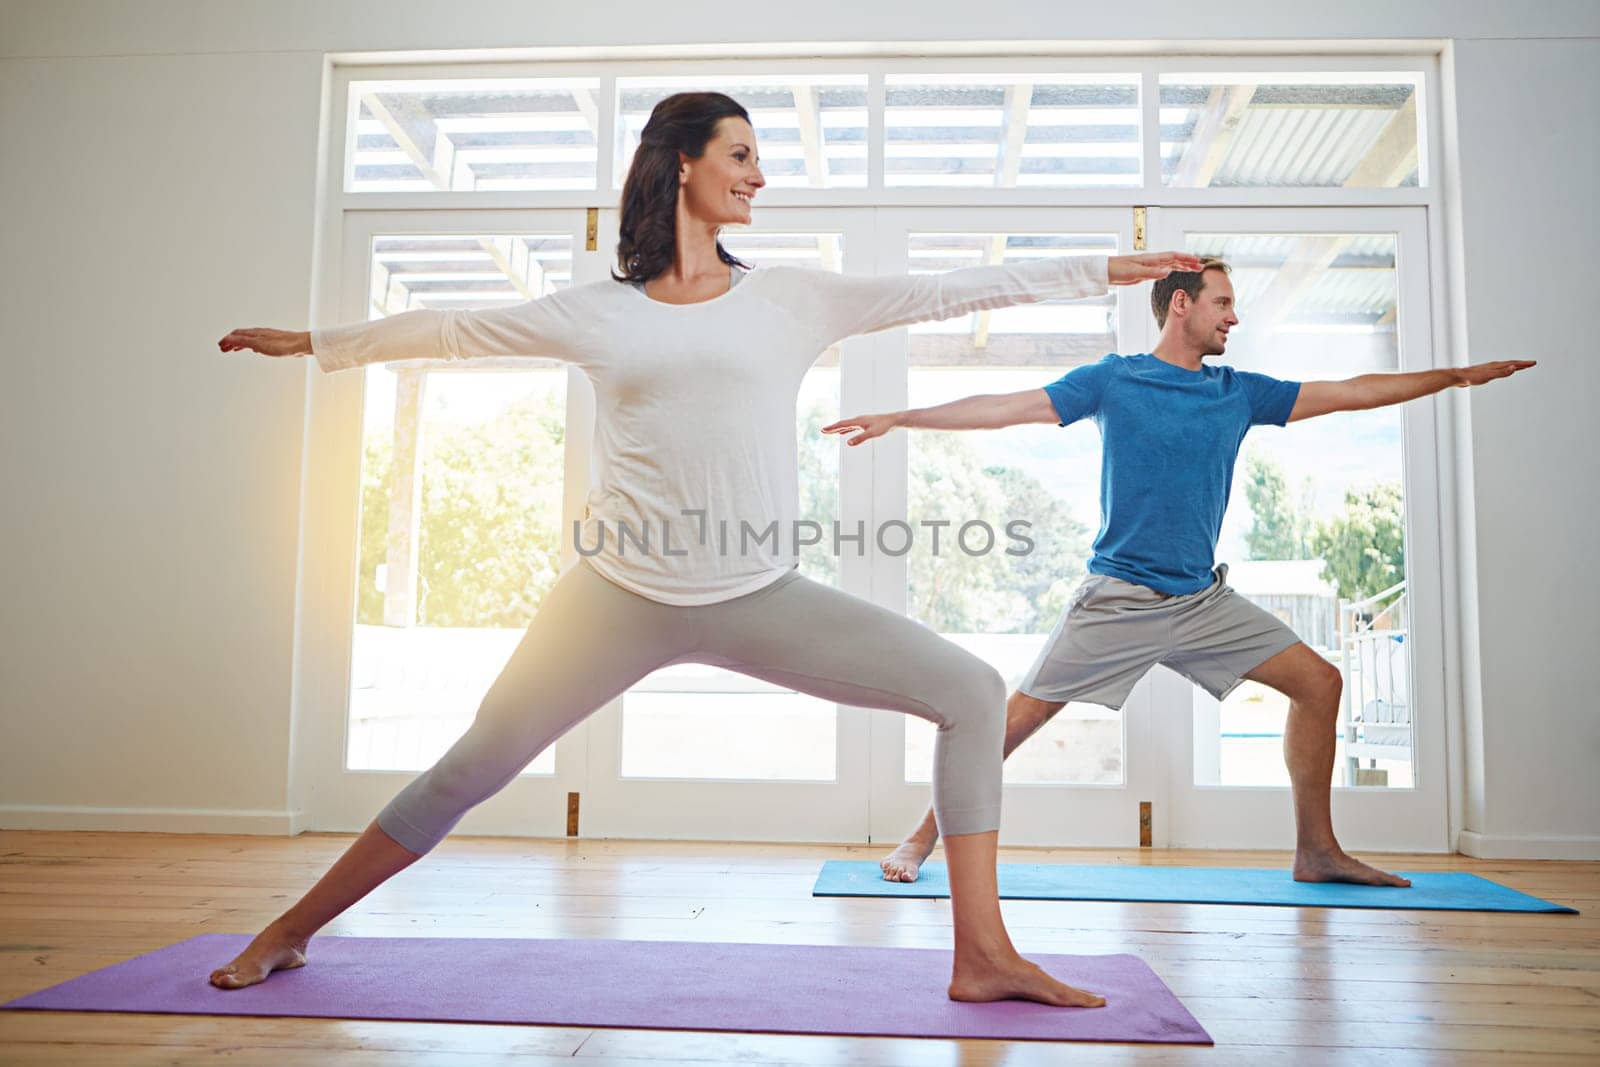 Practicing yoga together. Full length shot of a mature couple practicing yoga in their home